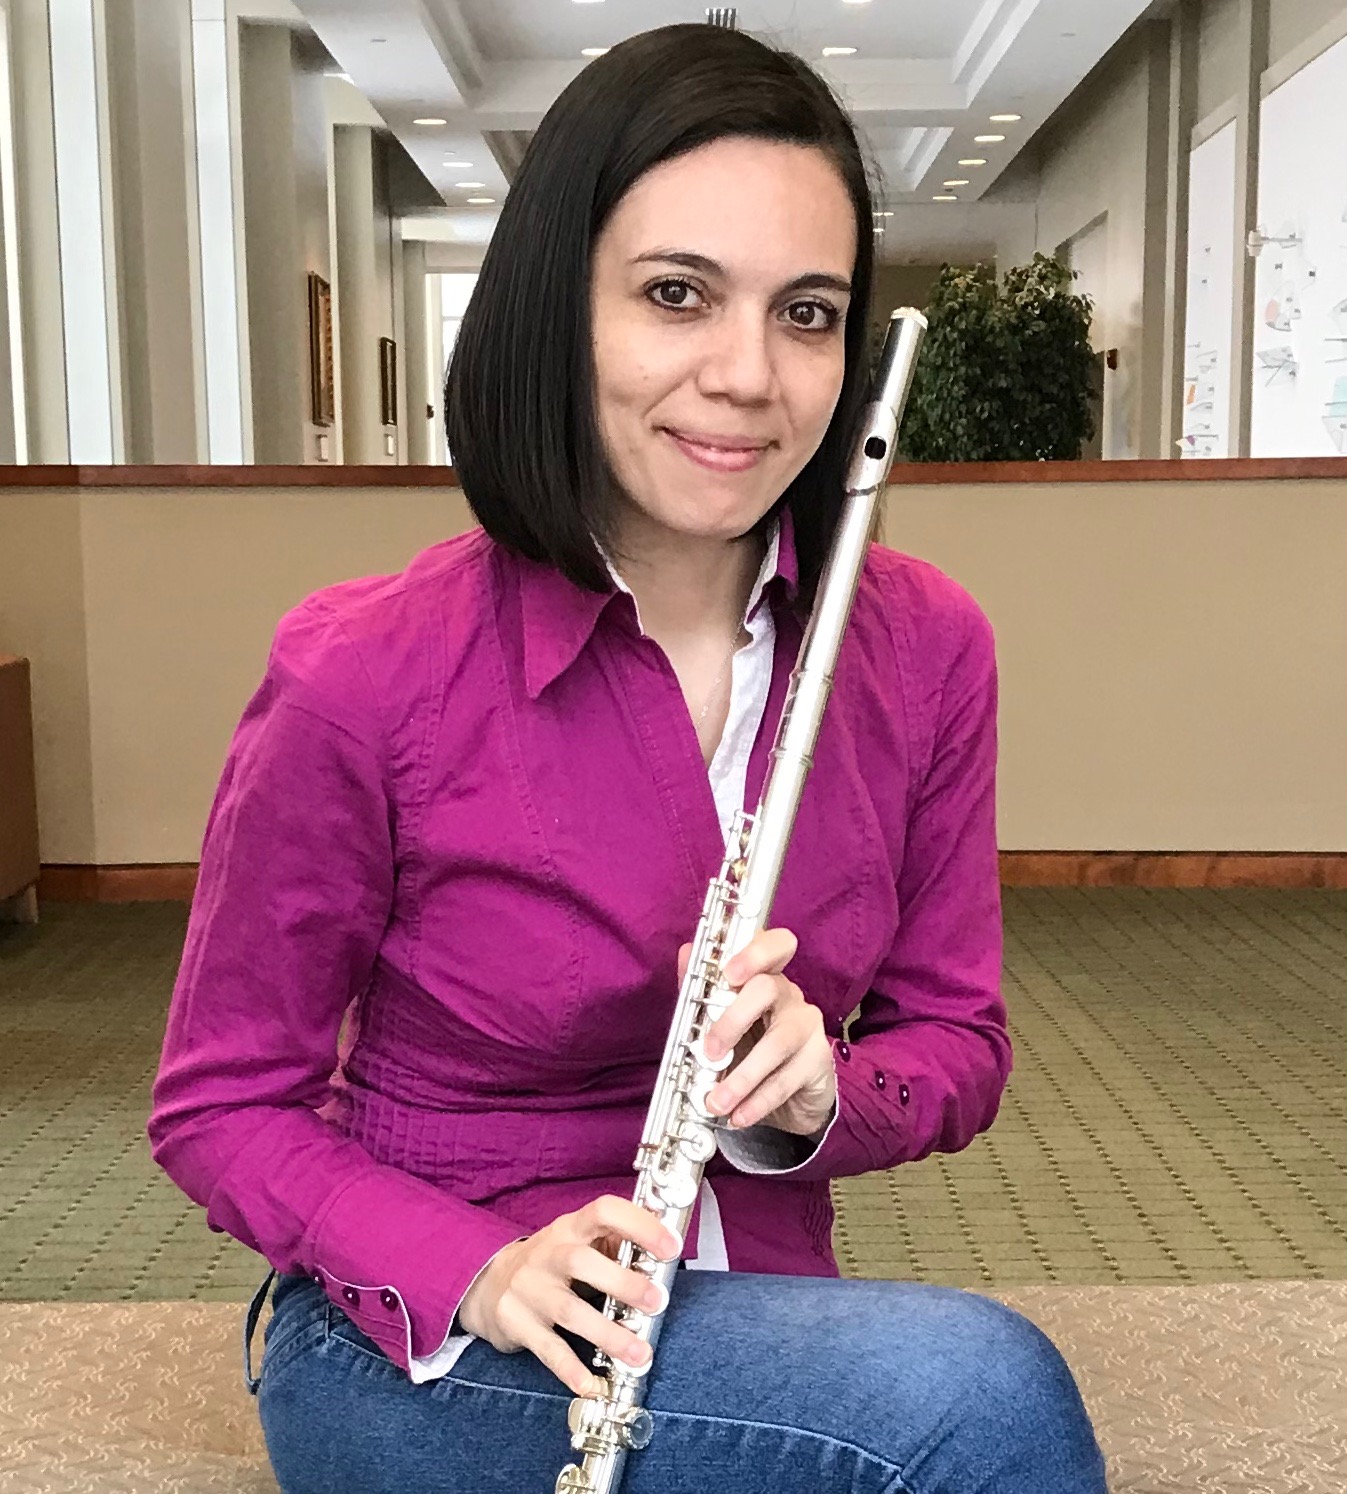 student holding a flute